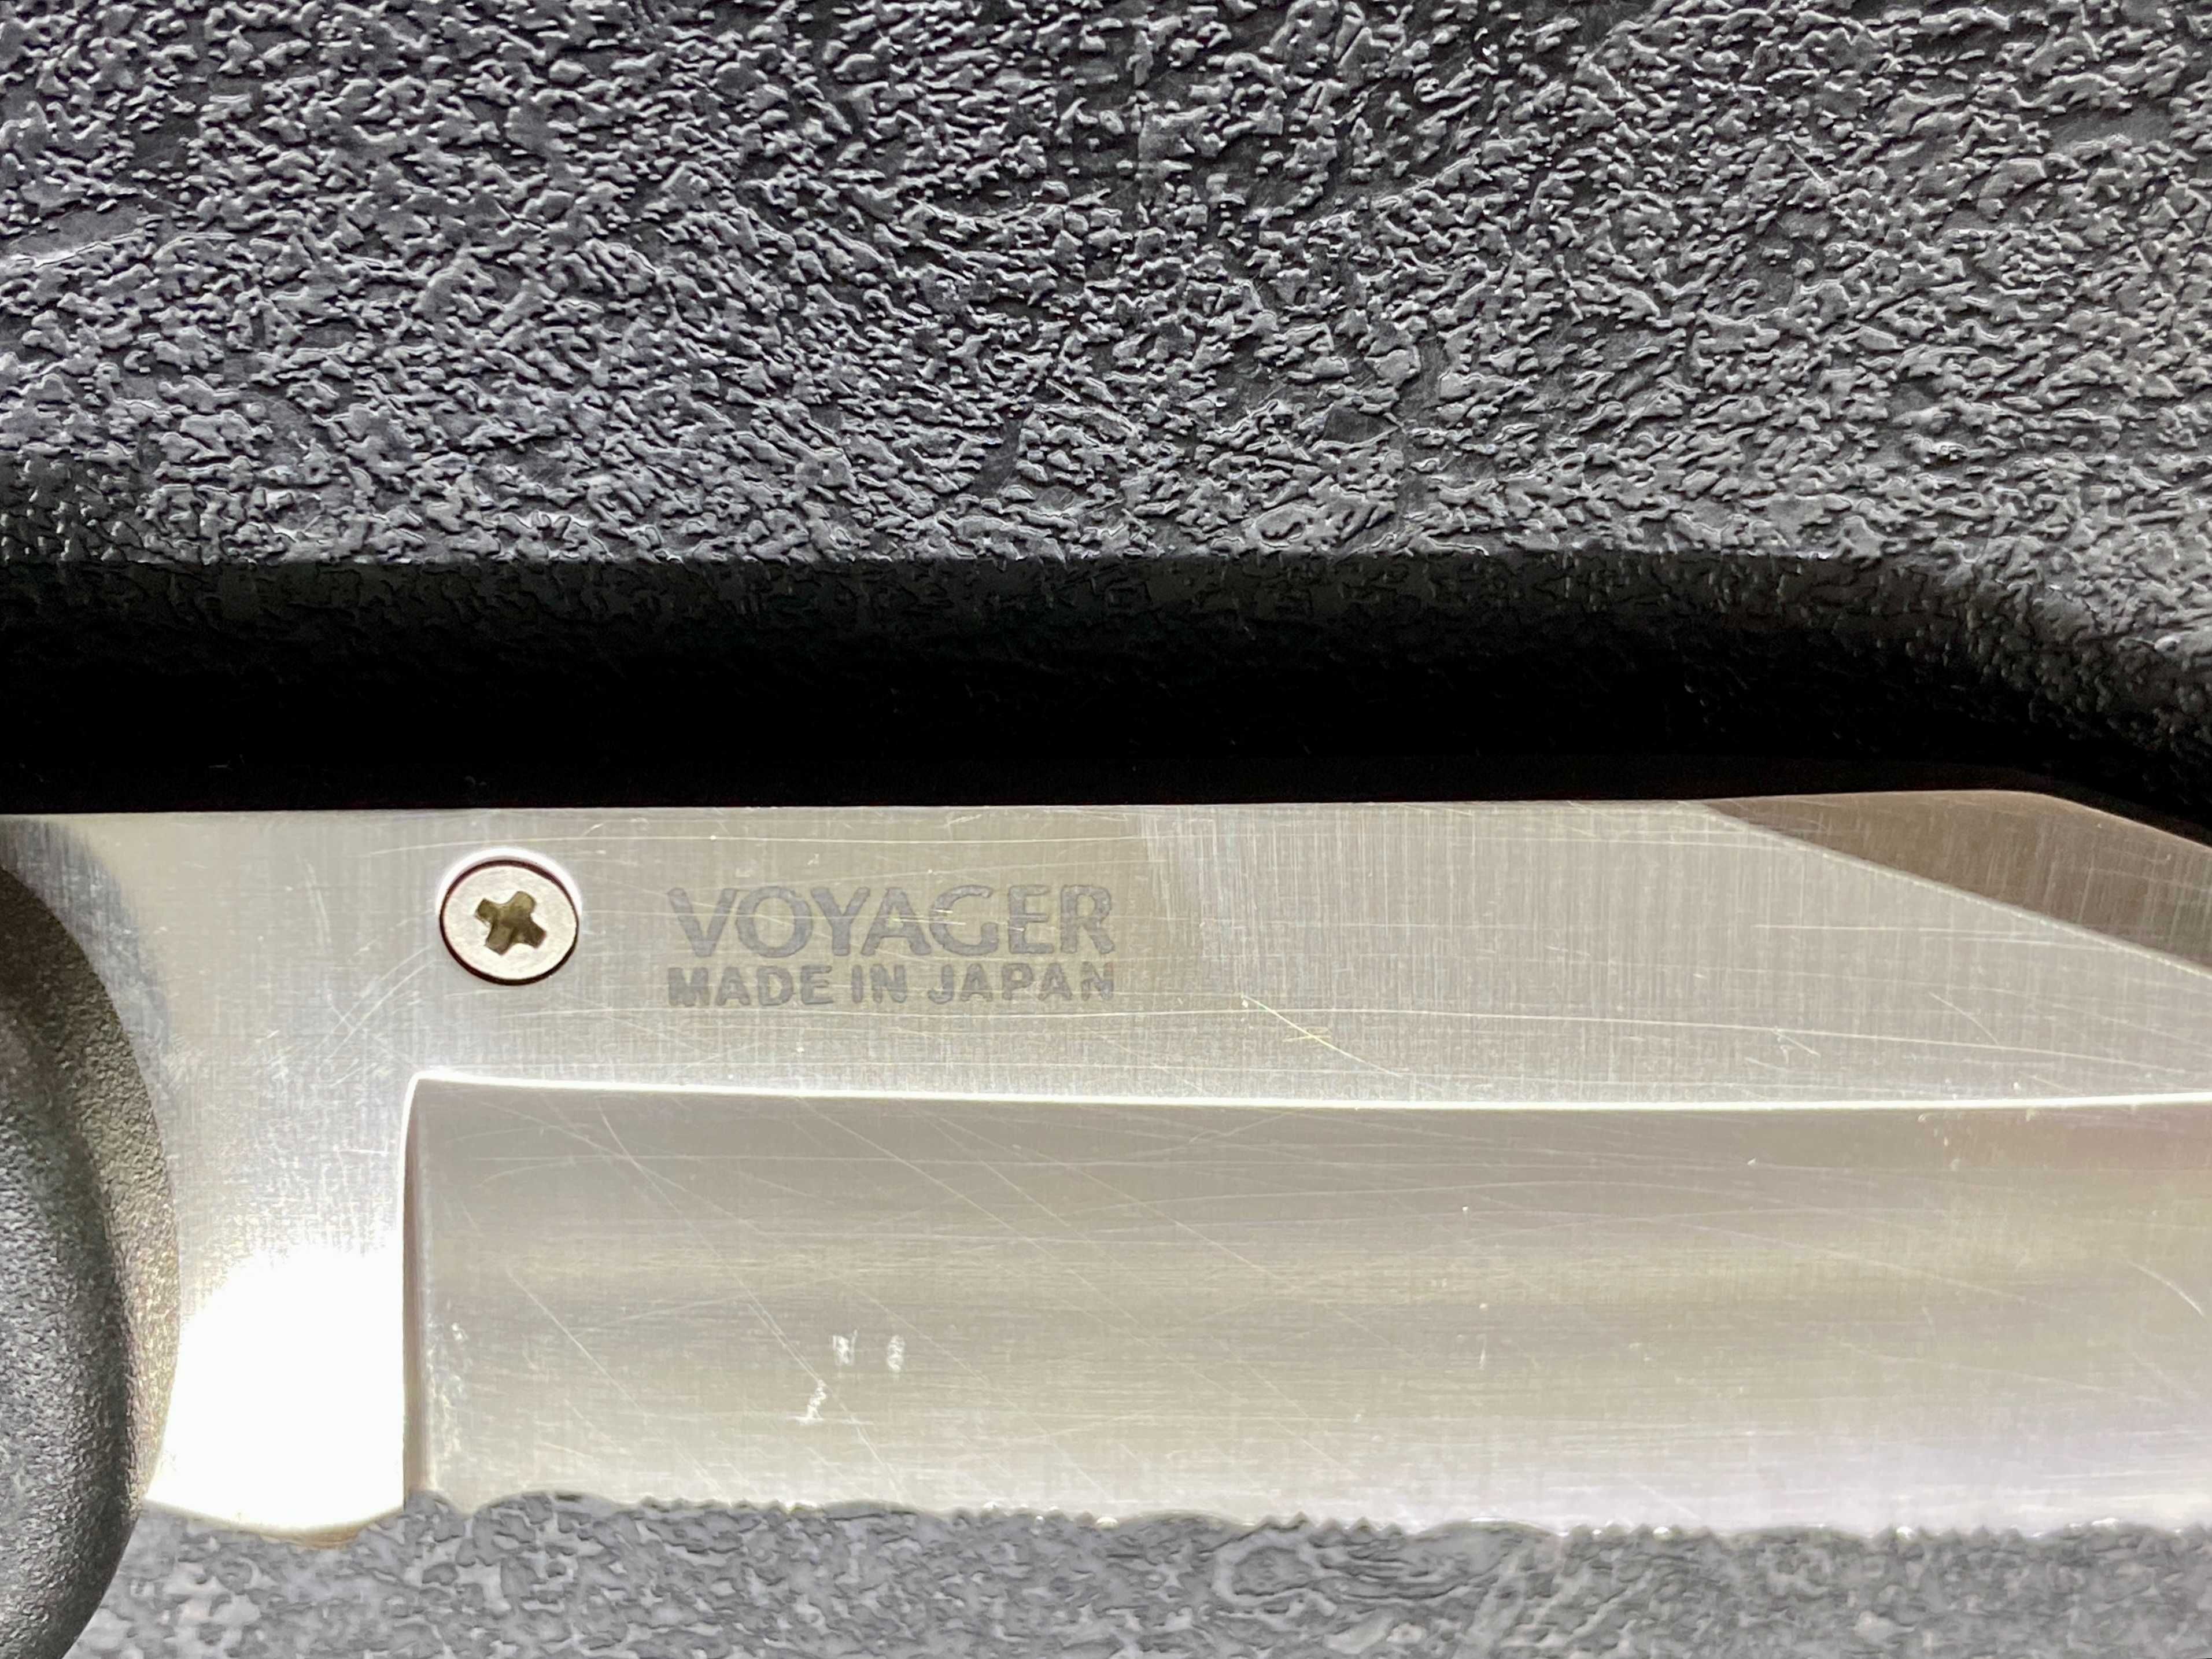 Cold Steel Voyager Large Serrated. Made in Japan